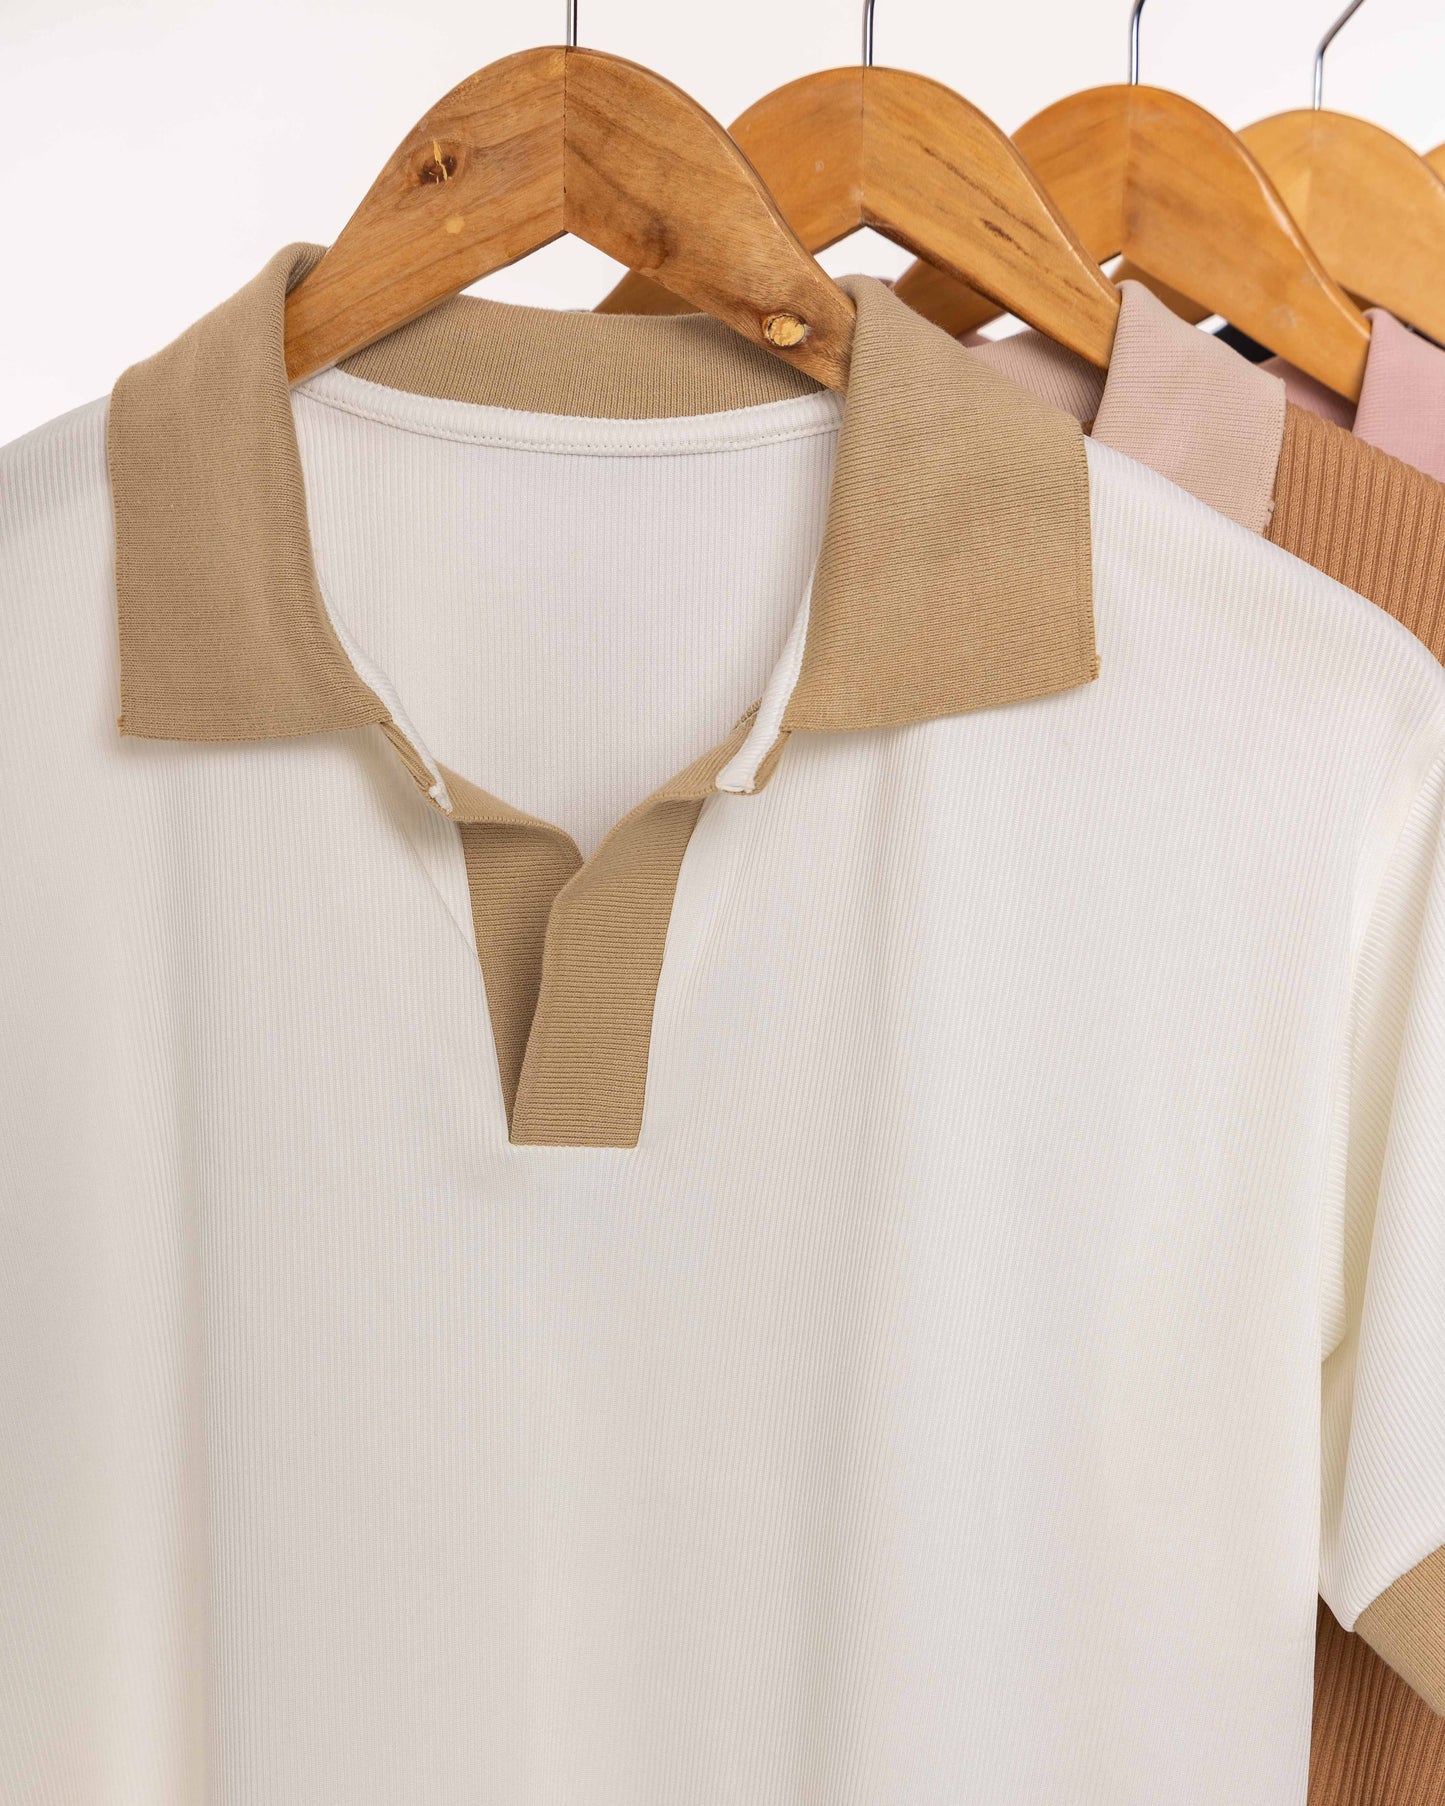 Lining Polo Tshirt (White and Light Brown)